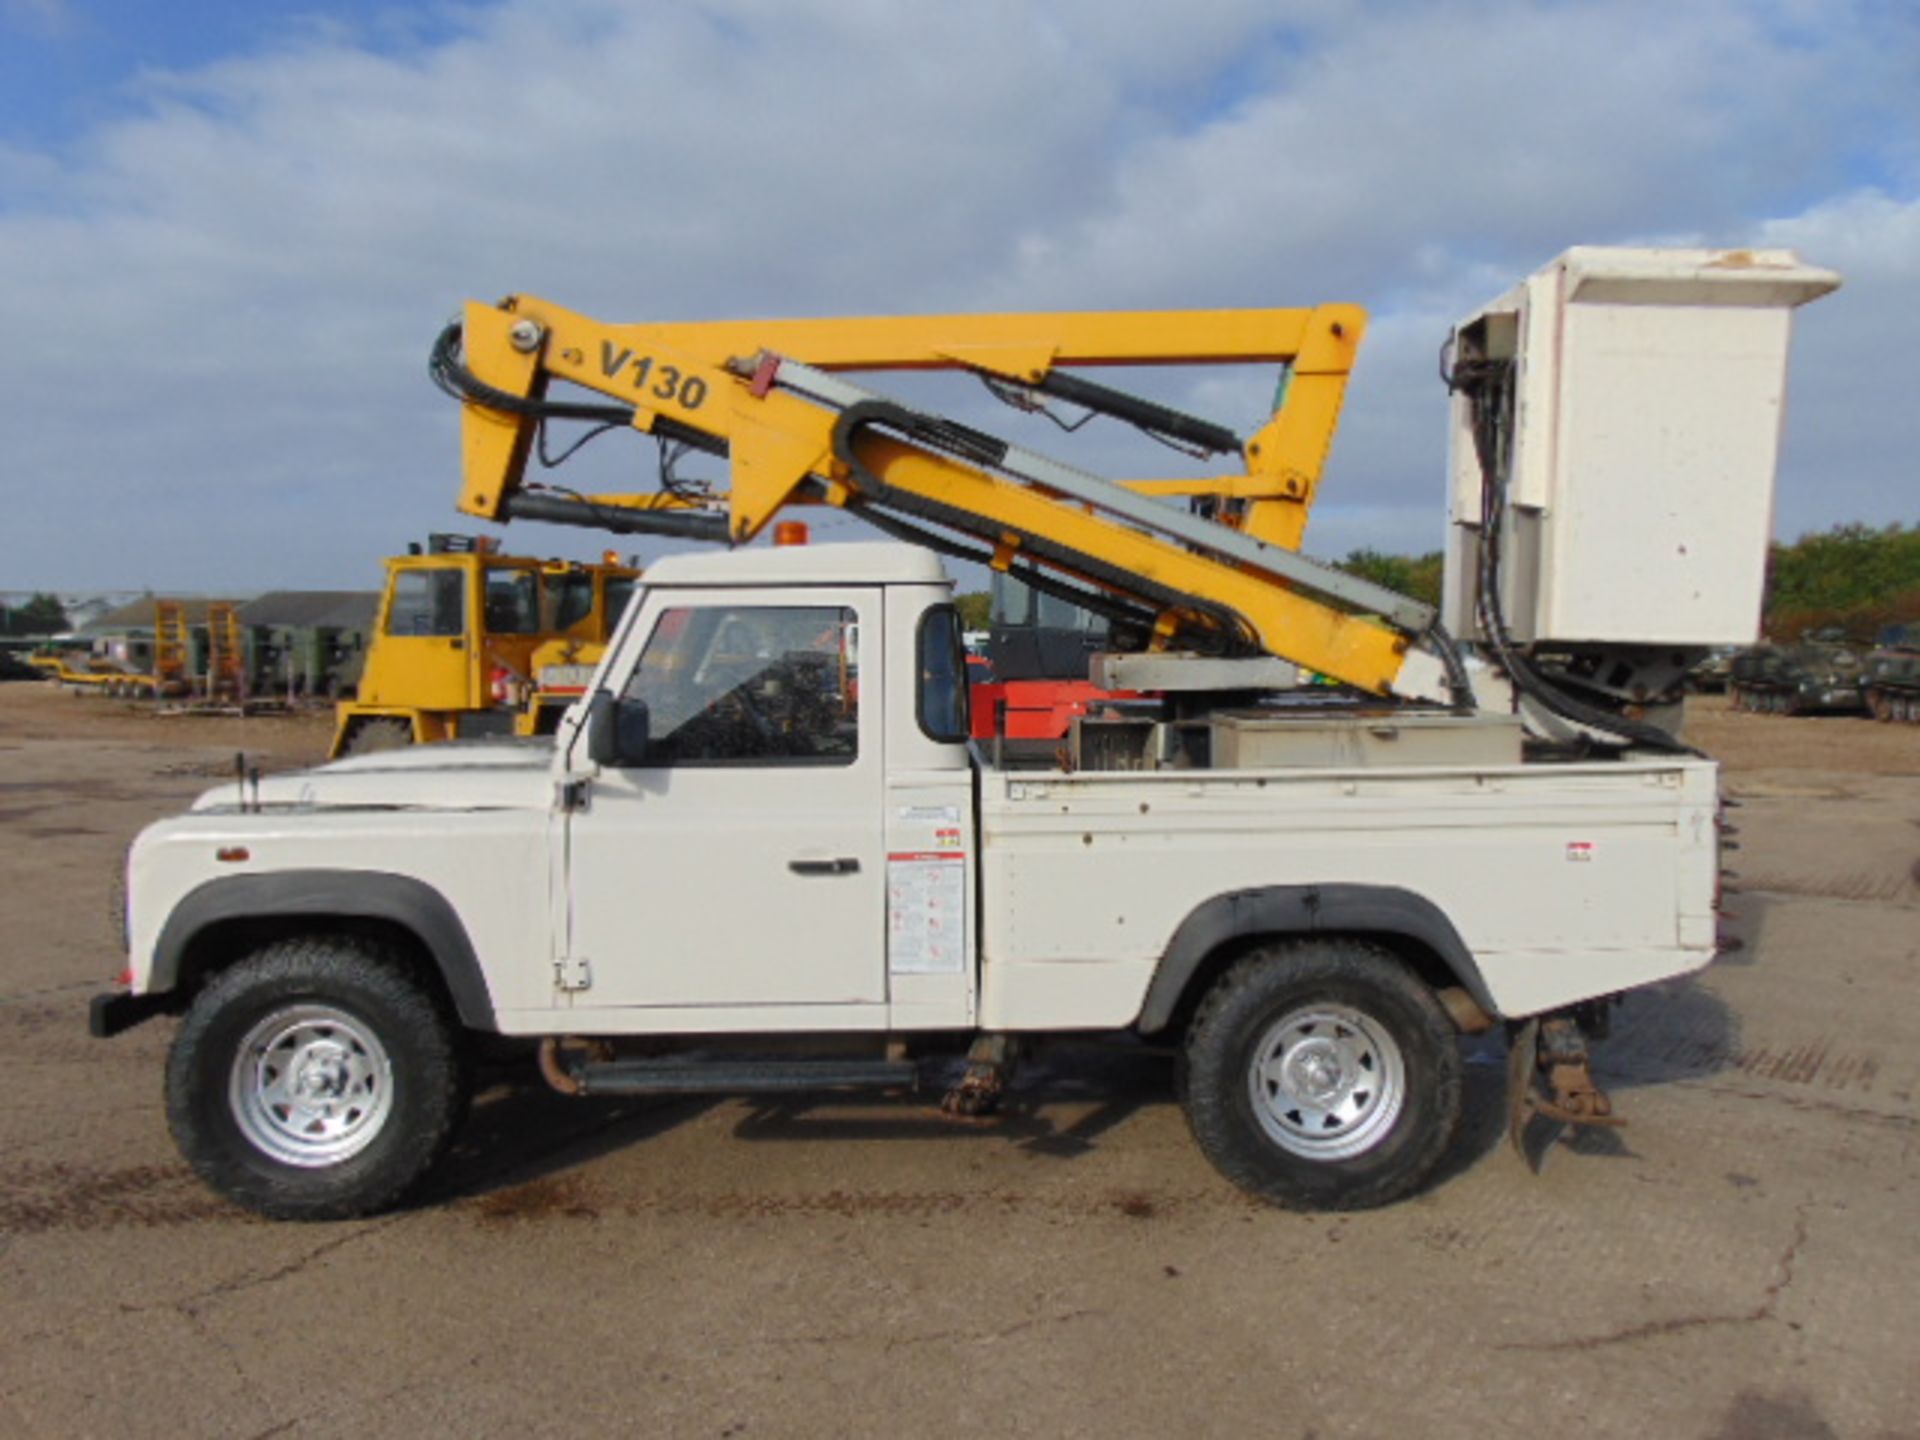 Land Rover Defender 110 High Capacity Cherry Picker - Image 5 of 40